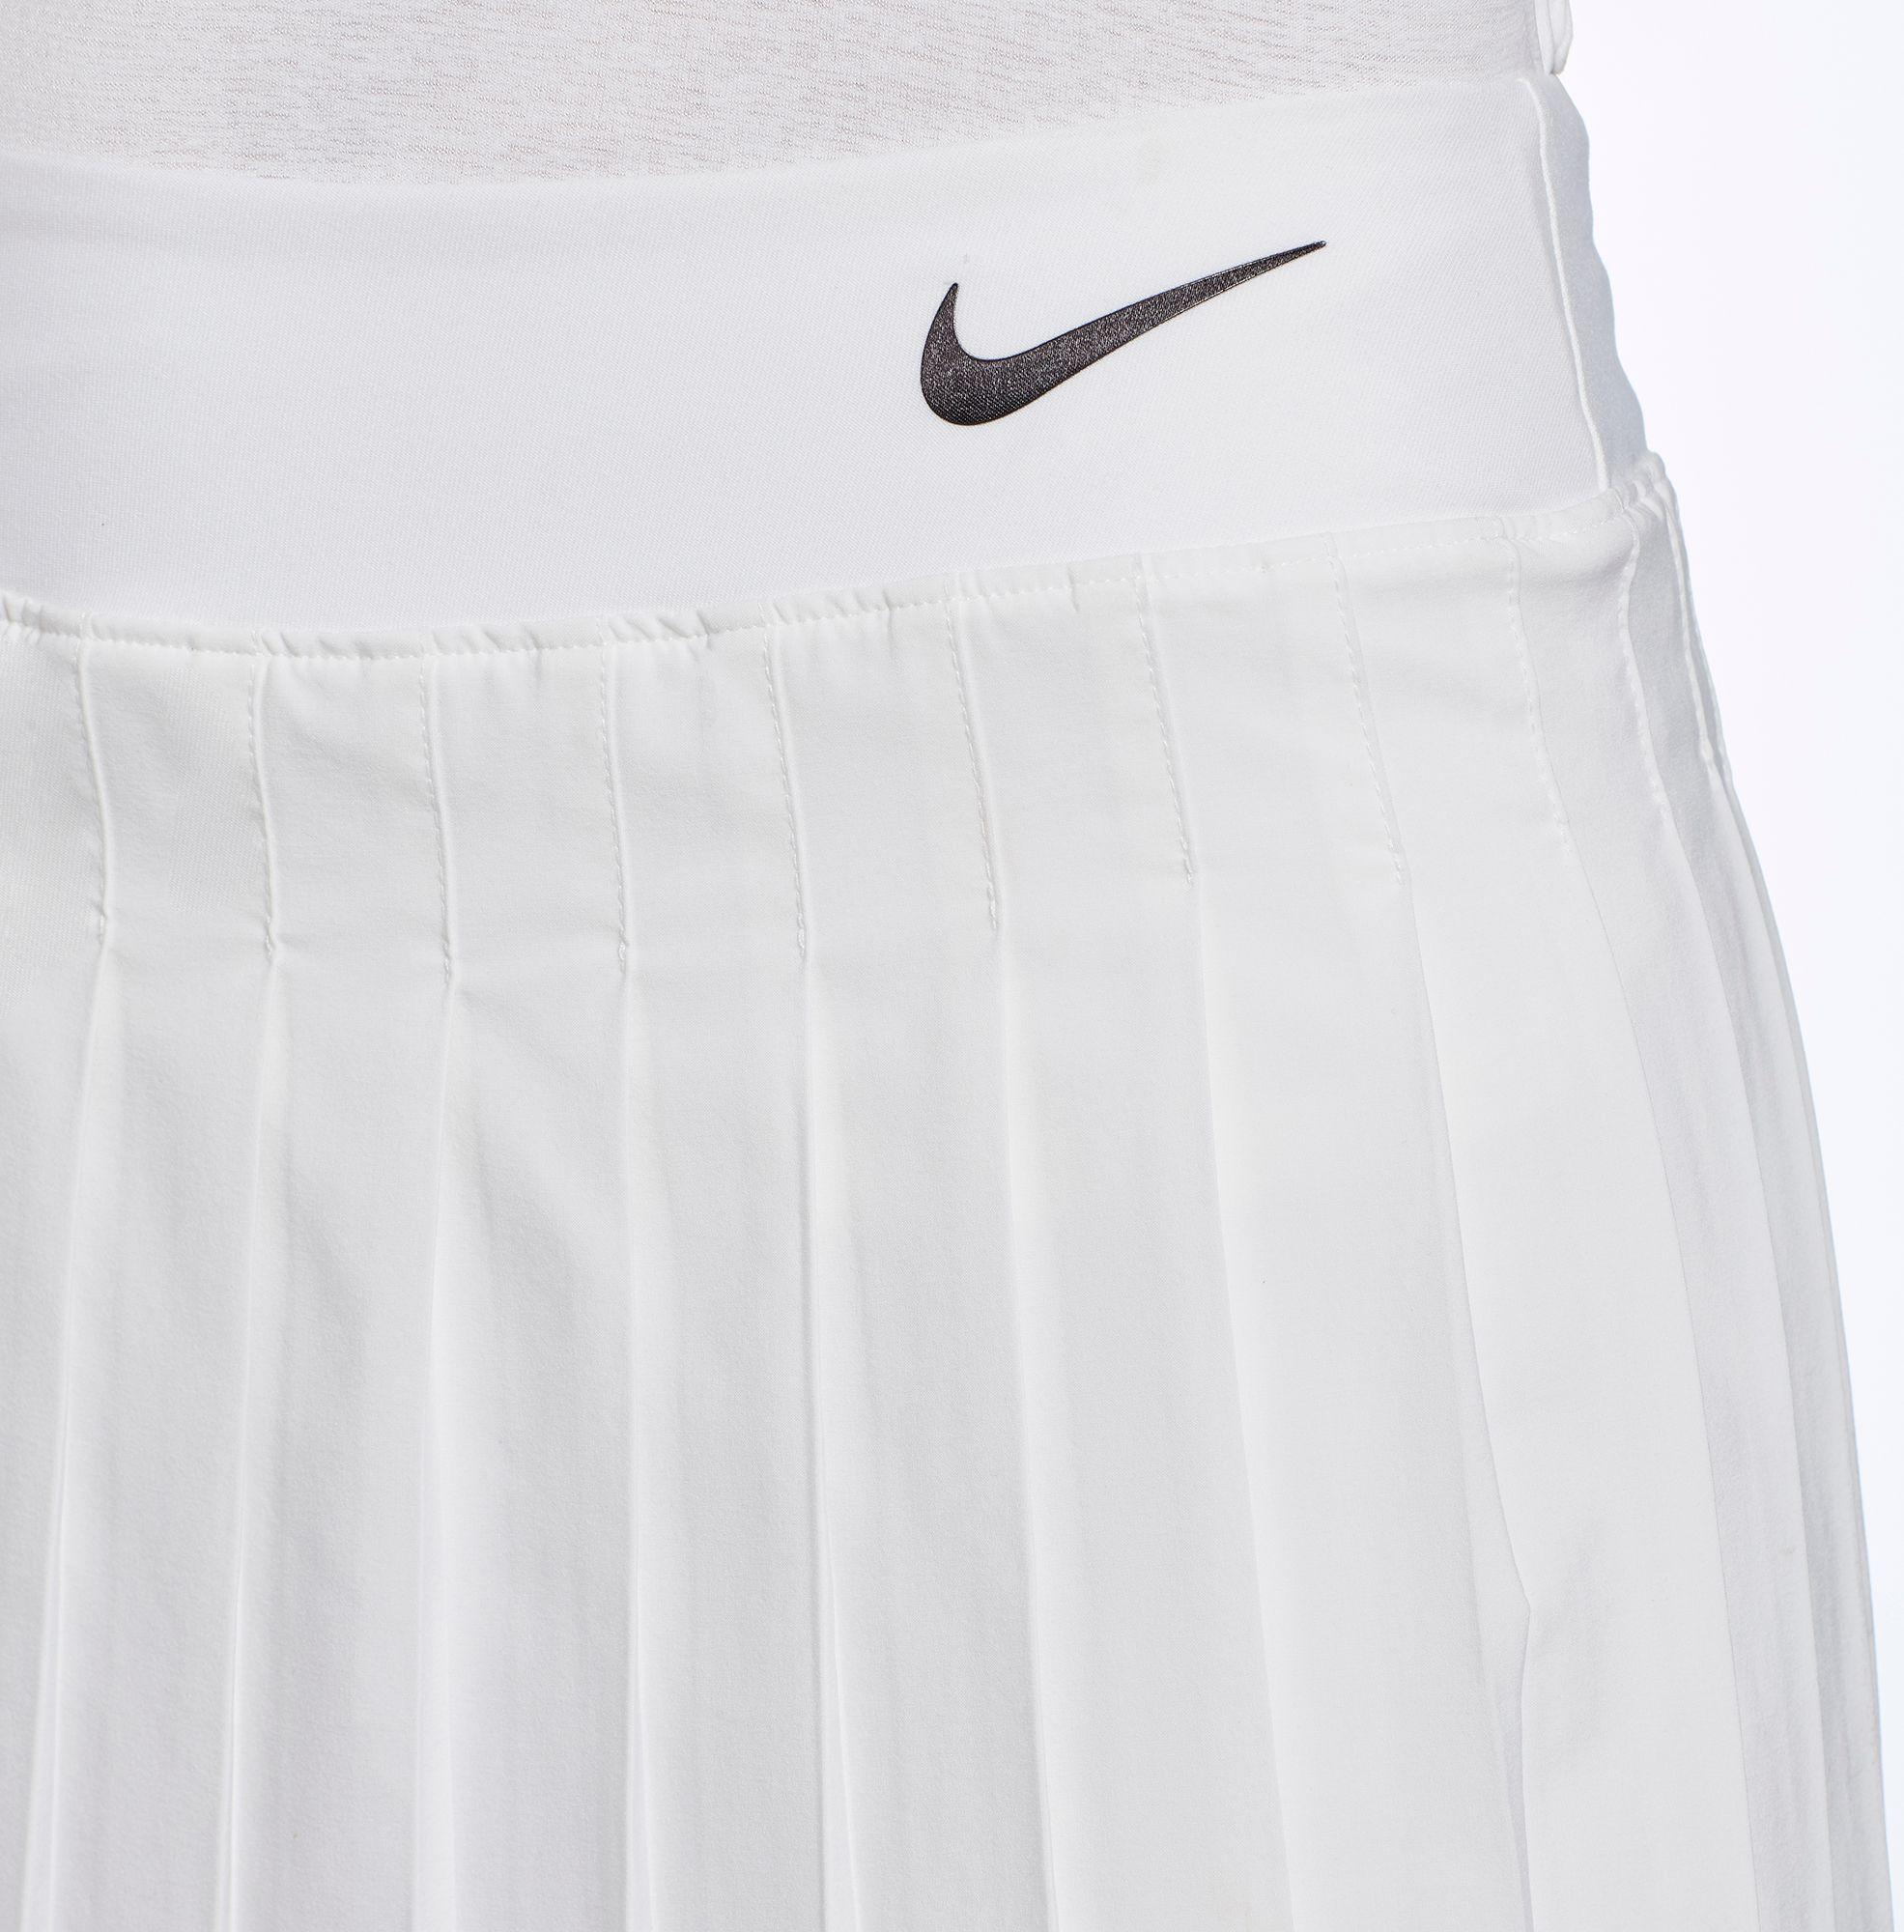 Court Victory Wide Band Tennis Skirt 